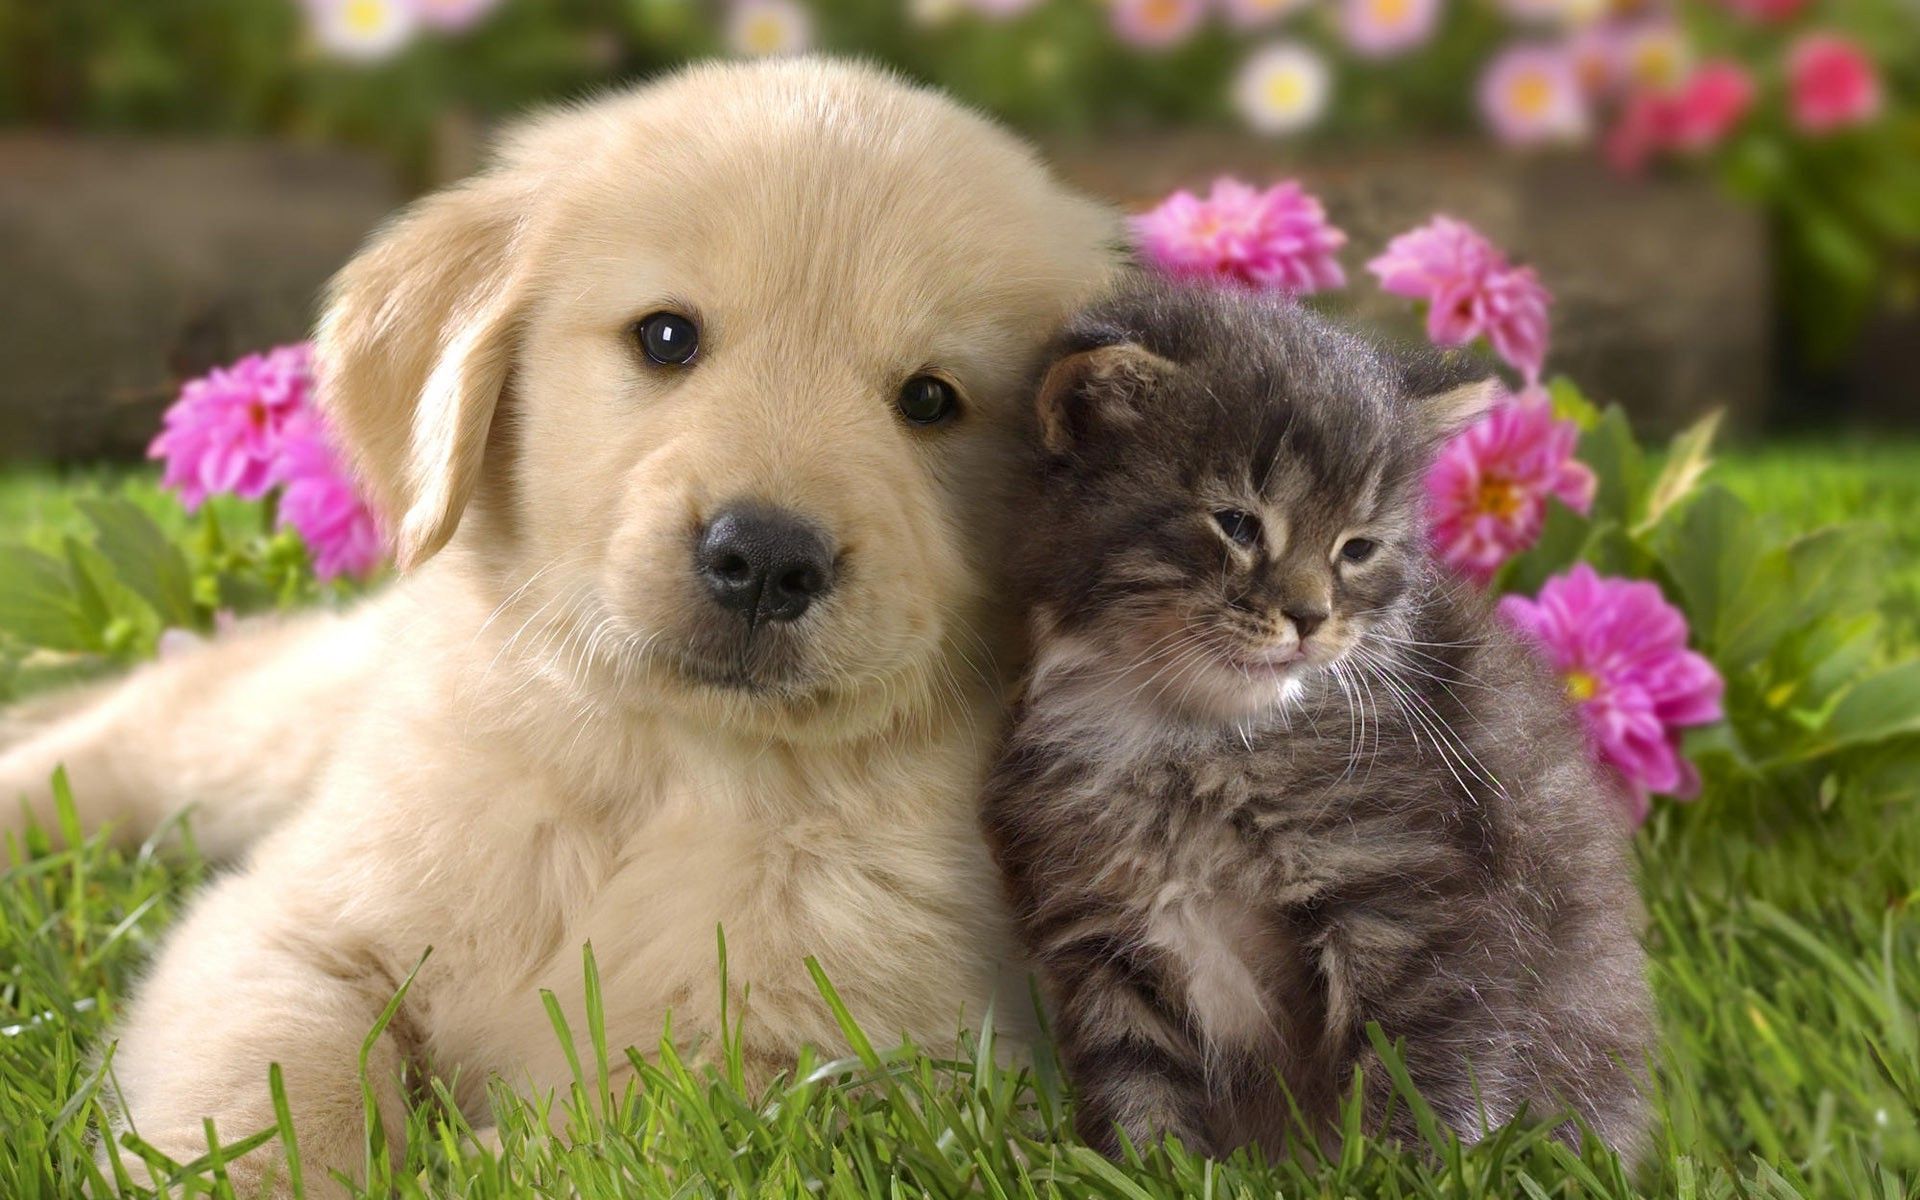 Free Cute Dog and Cat Wallpaper HD. Cute cats and dogs, Kittens and puppies, Cute dogs